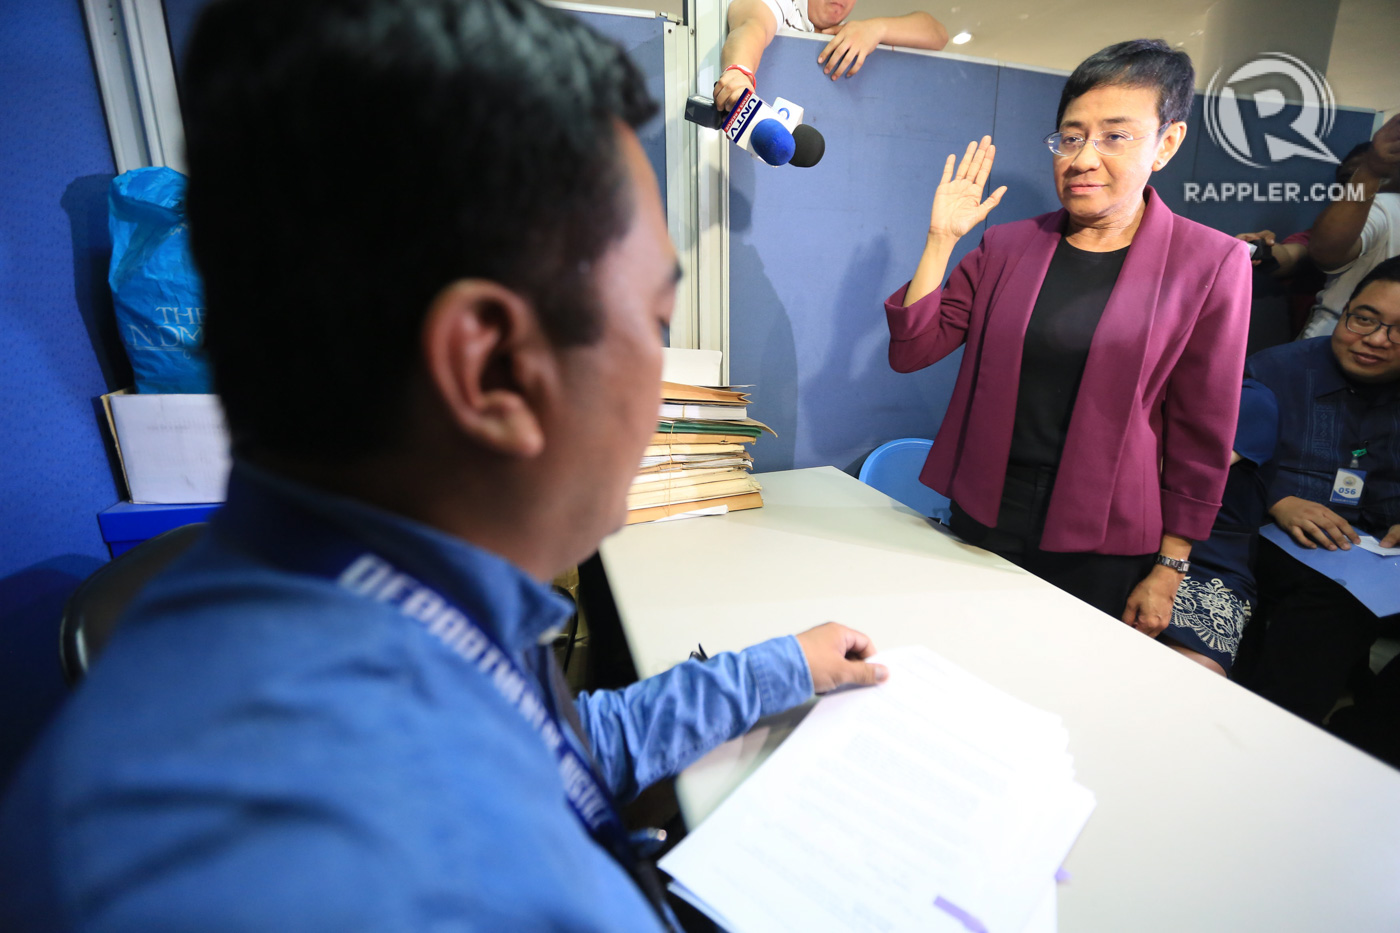 COUNTER-AFFIDAVIT. Rappler CEO Maria Ressa on April 24, 2018, swears to the truthfulness of the counter-affidavit that her lawyers will file on her behalf the next day. Photo by Ben Nabong/Rappler  